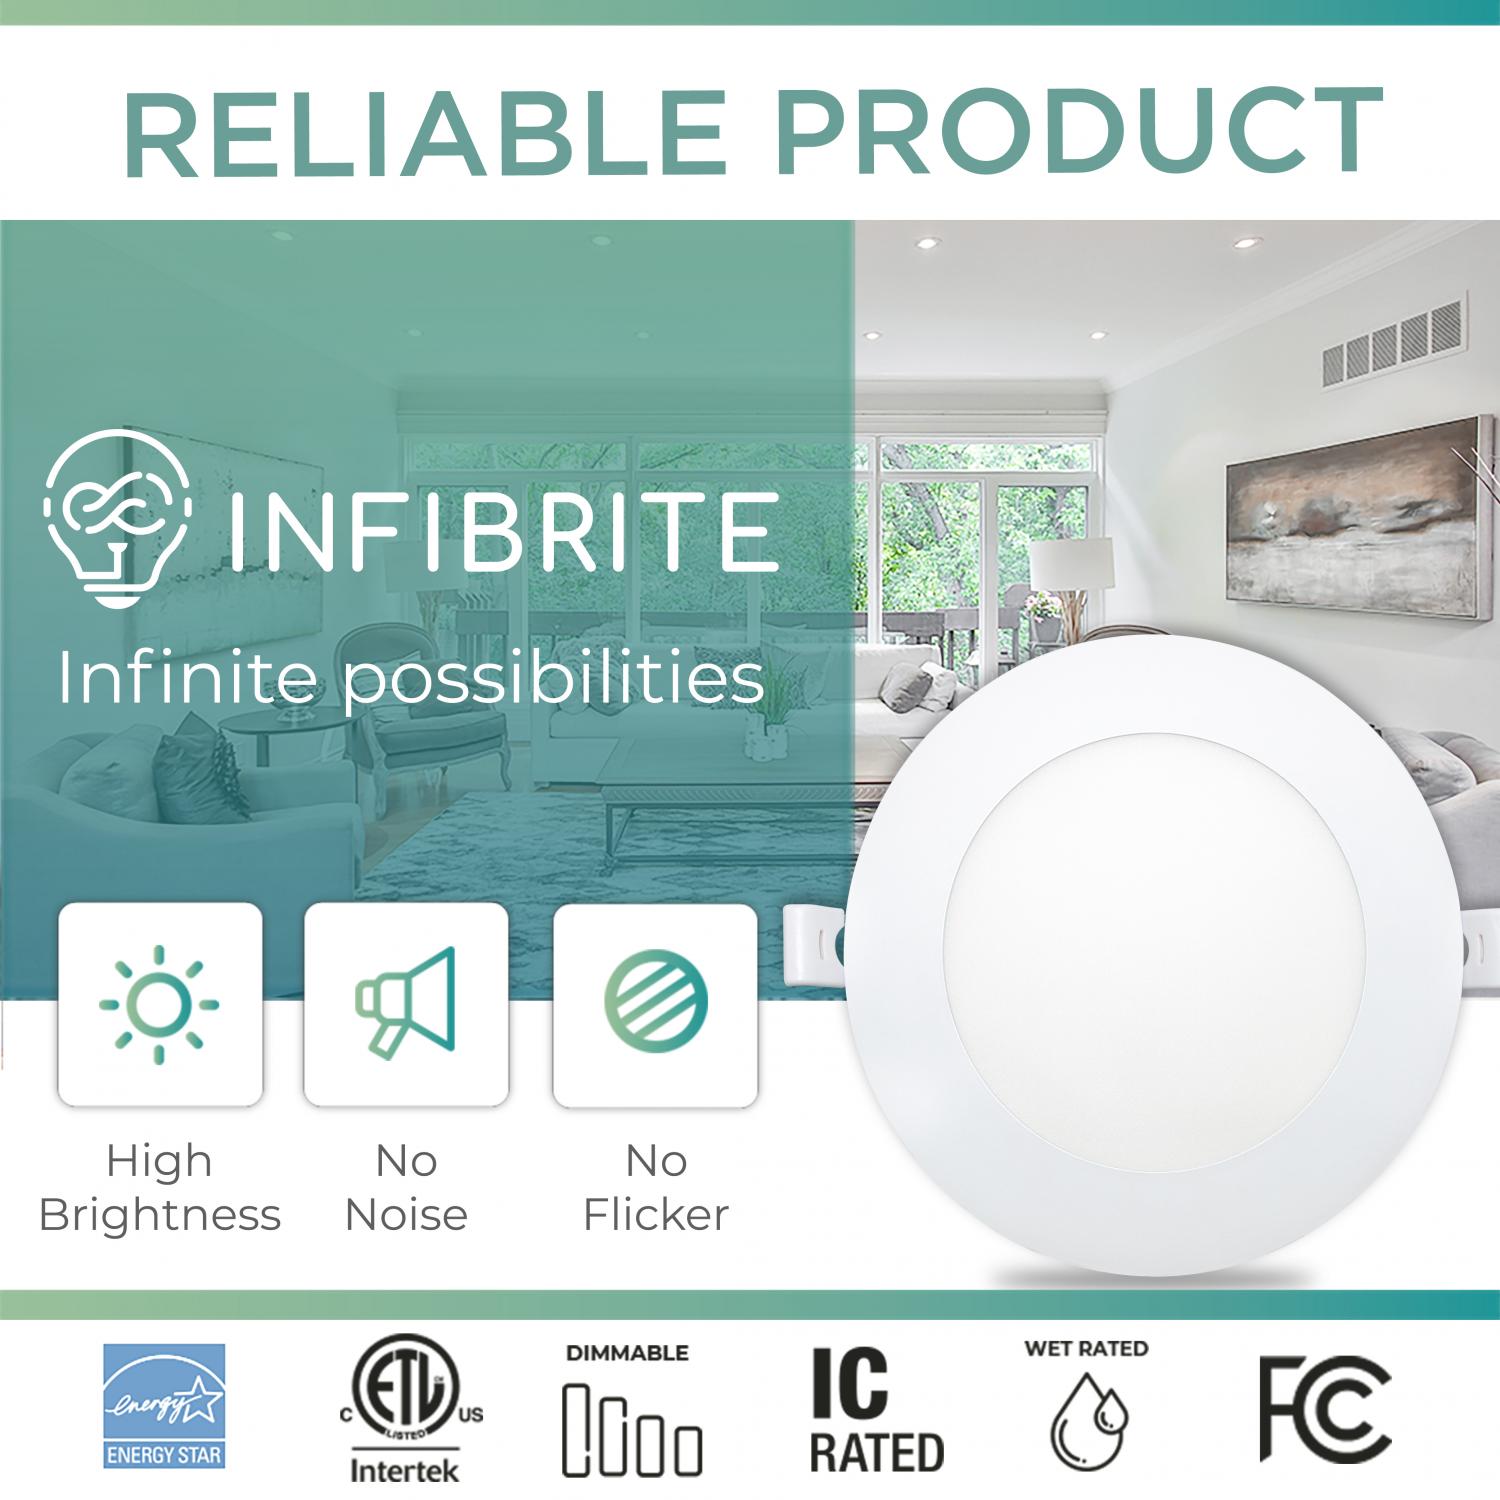 Infibrite 6 Inch 6000K Clear White 12W 1050LM Ultra-Slim LED Ceiling Light with Junction Box, Flush Mount, Dimmable, Fixture for Bedroom, Wet Rated for Bathroom, Easy Install, 110W Eqv, ETL & Energy Star, US Company